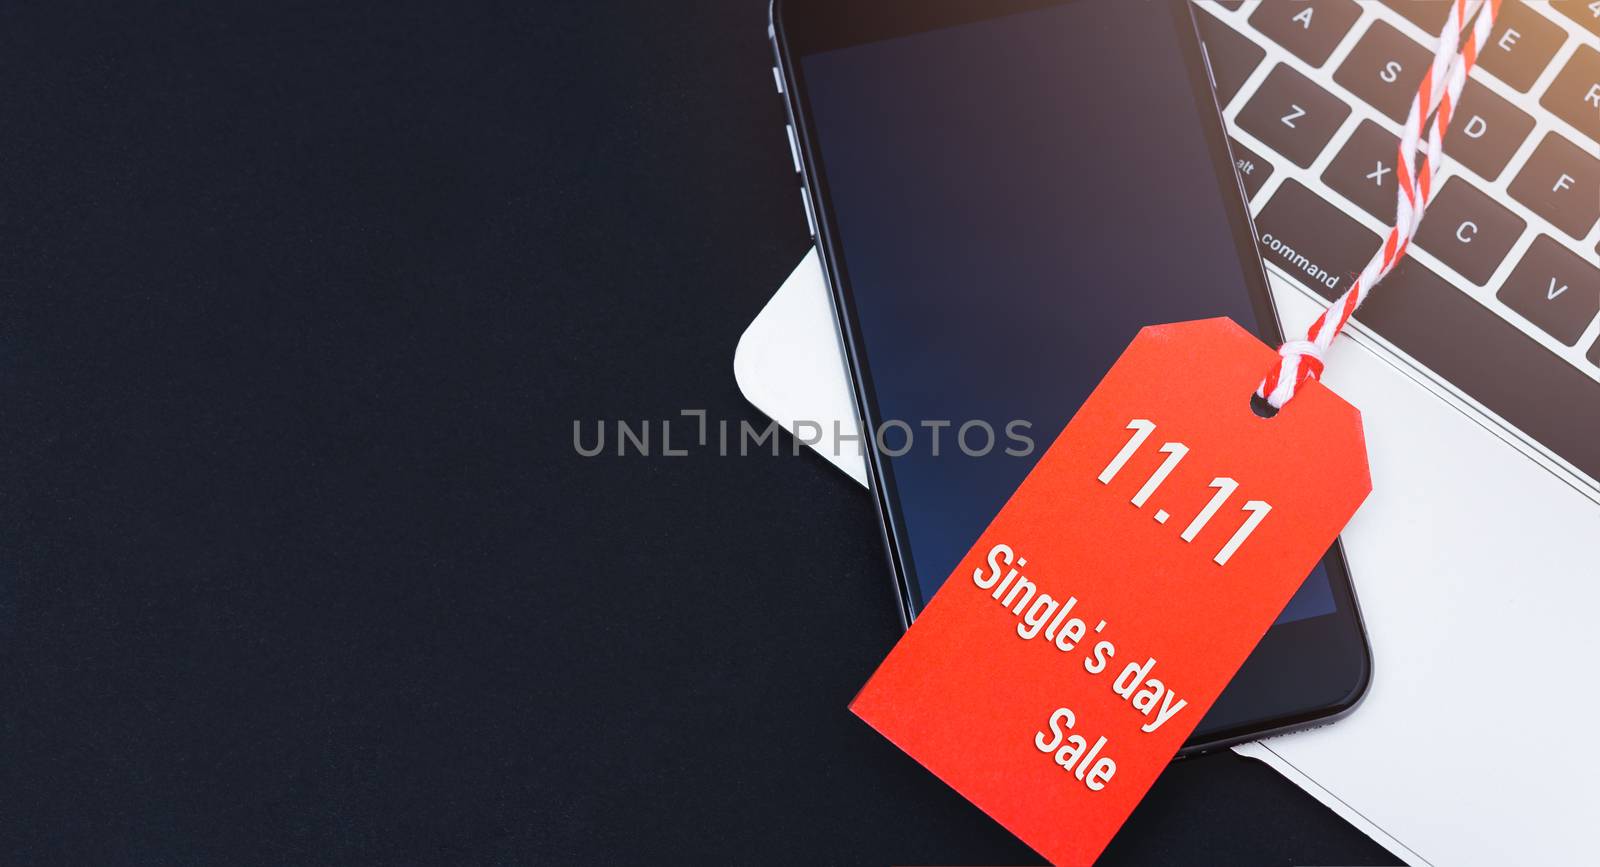 Single's day sale text red tag have mobile smart phone over lapt by Sorapop